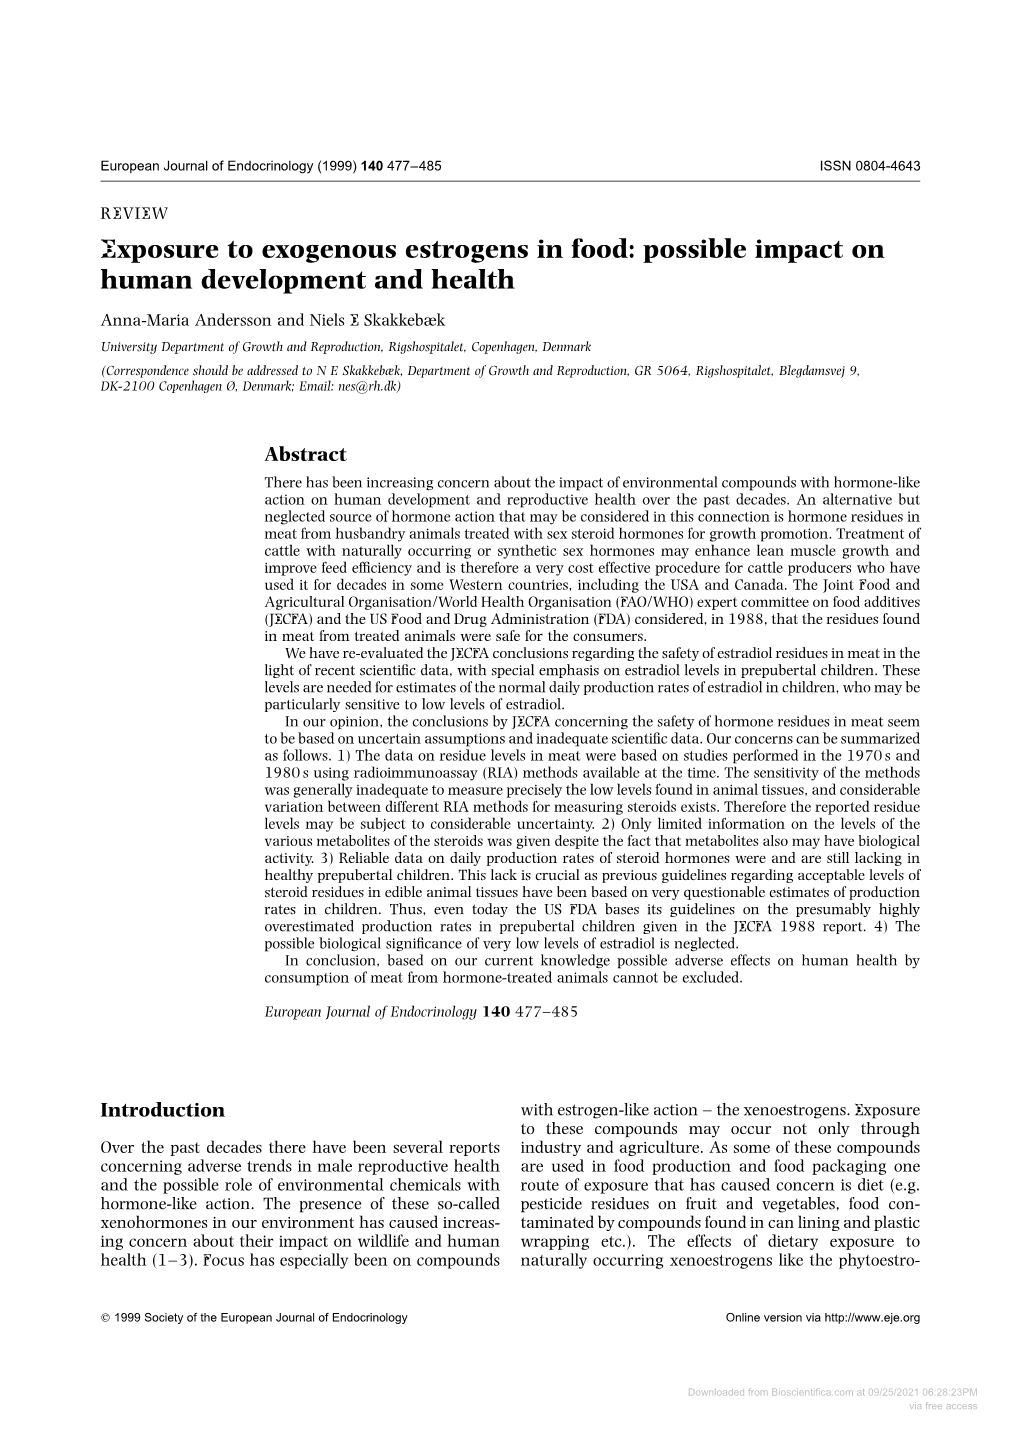 Exposure to Exogenous Estrogens in Food: Possible Impact on Human Development and Health